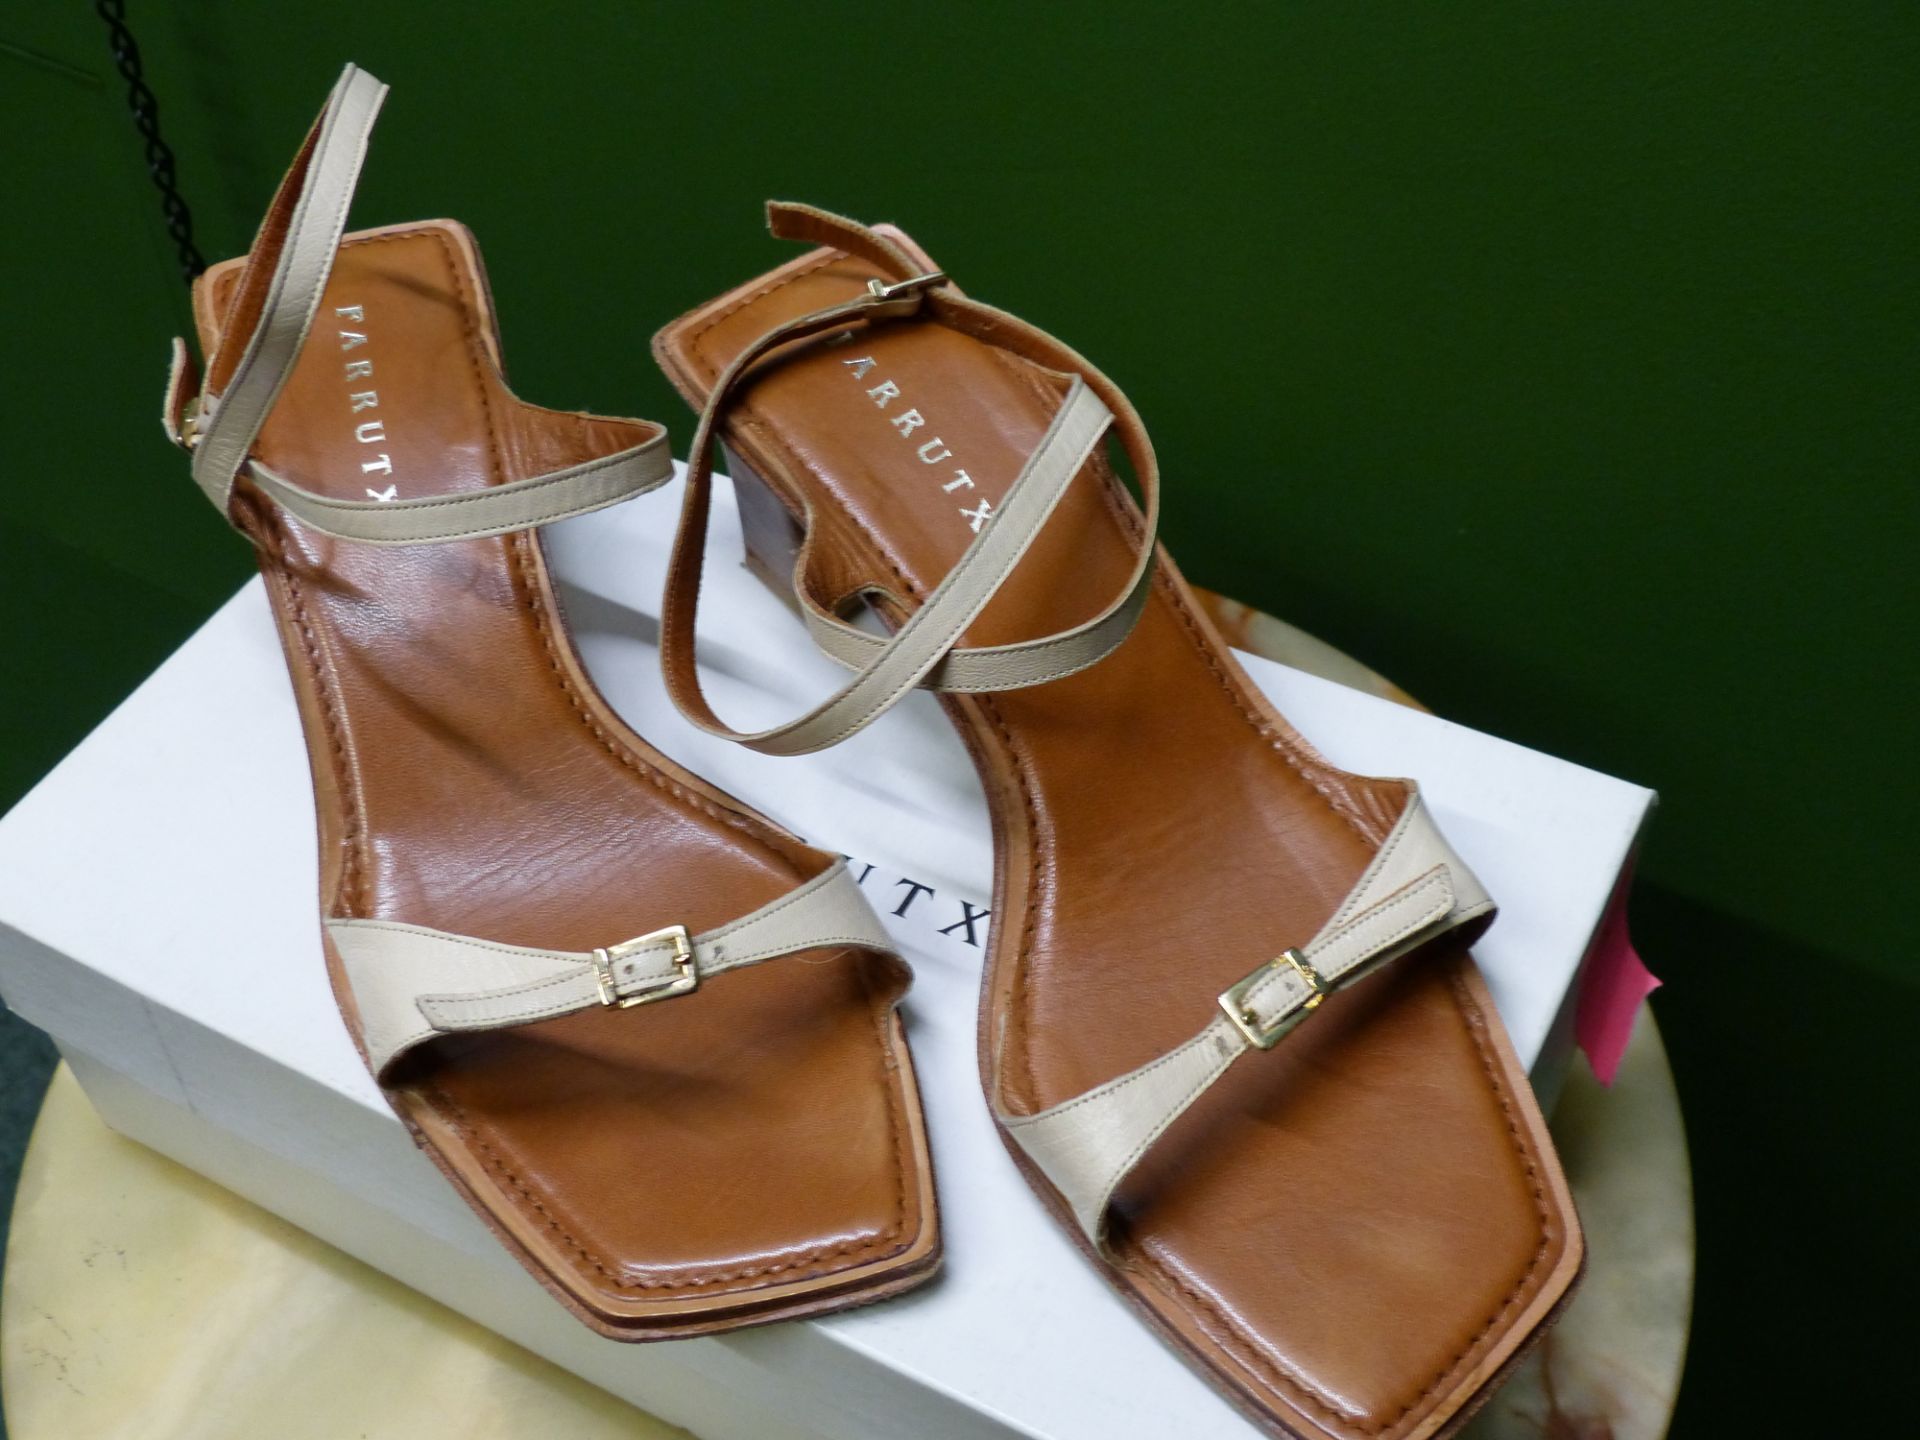 SHOES. FARRUTX SPANISH BEIGE LEATHER BUCKLED HEALED SANDAL EUR 40 HEAL HEIGHT 5cm - Image 3 of 5